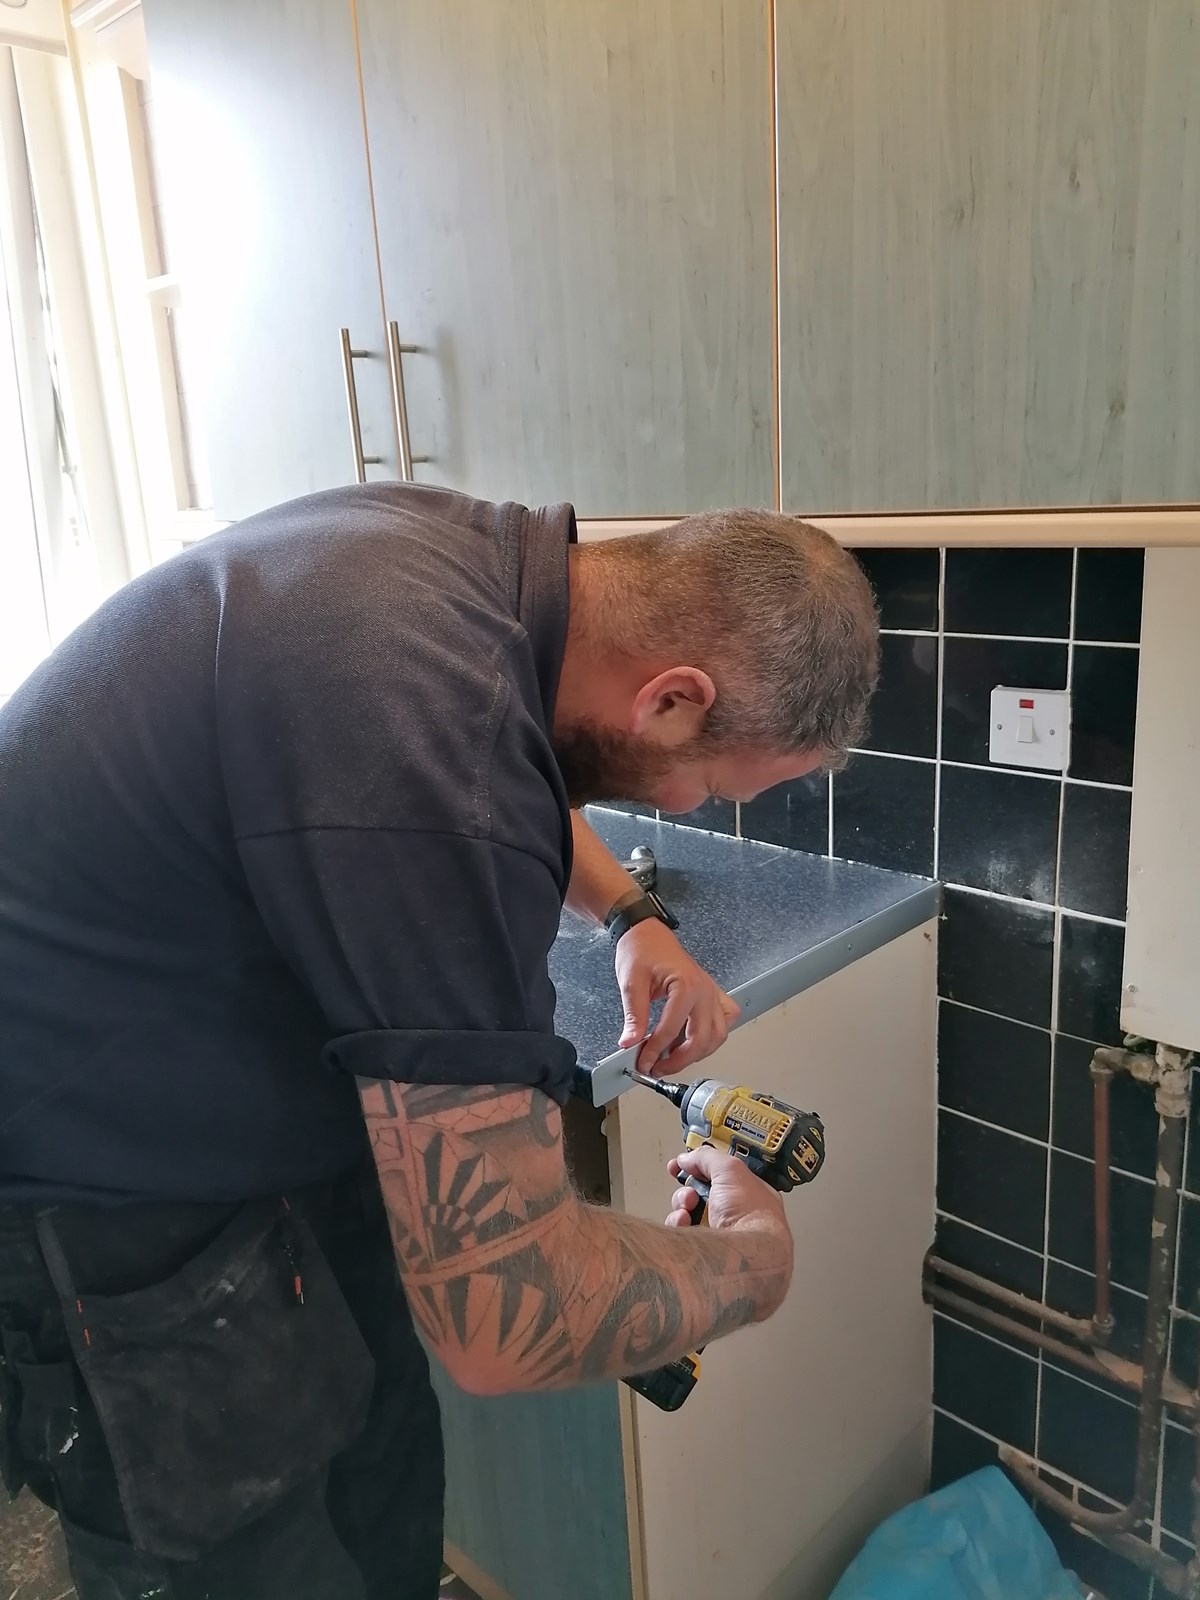 Adult Apprentice Ryan Gillon: Adult Apprentice Ryan Gillon pictured using a drill to secure a kitchen worktop